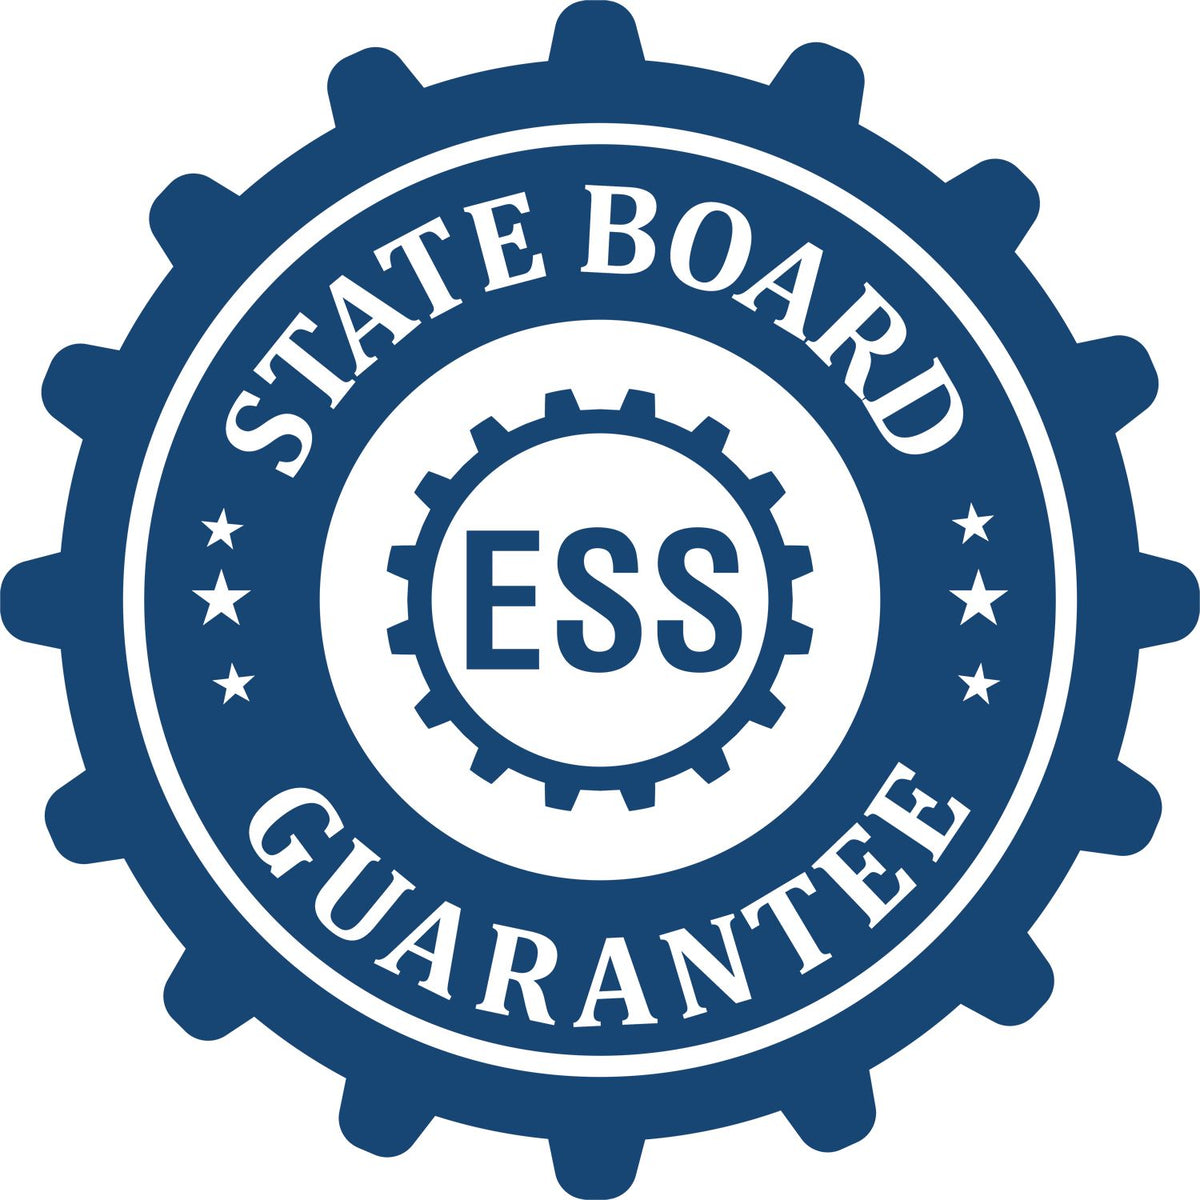 An emblem in a gear shape illustrating a state board guarantee for the North Carolina Geologist Desk Seal